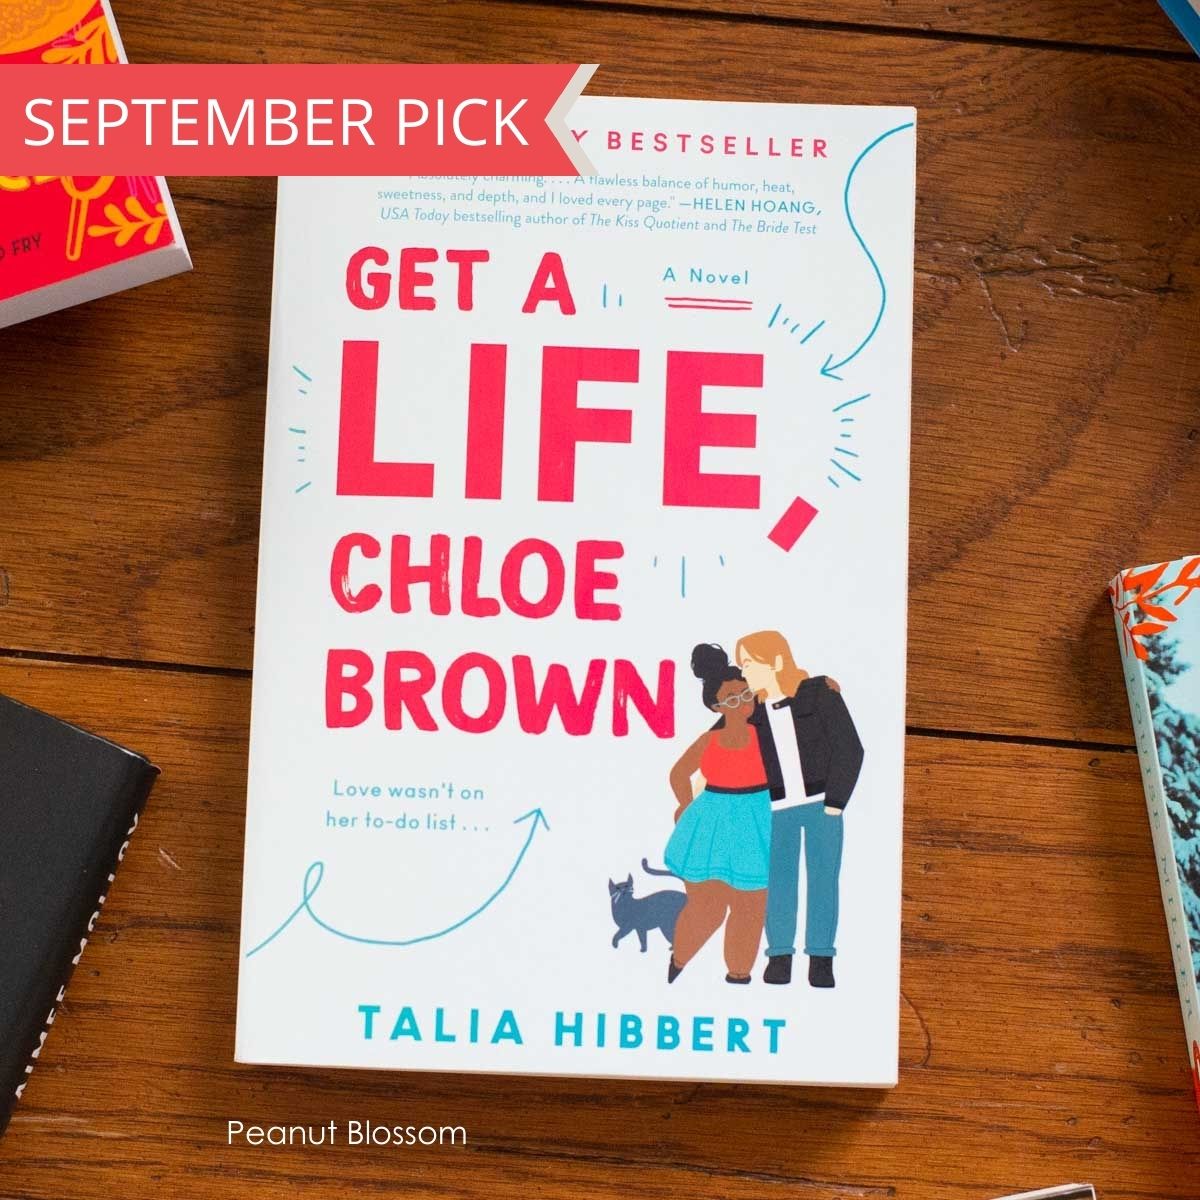 A copy of Get a Life, Chloe Brown by Talia Hibbert is on the table.